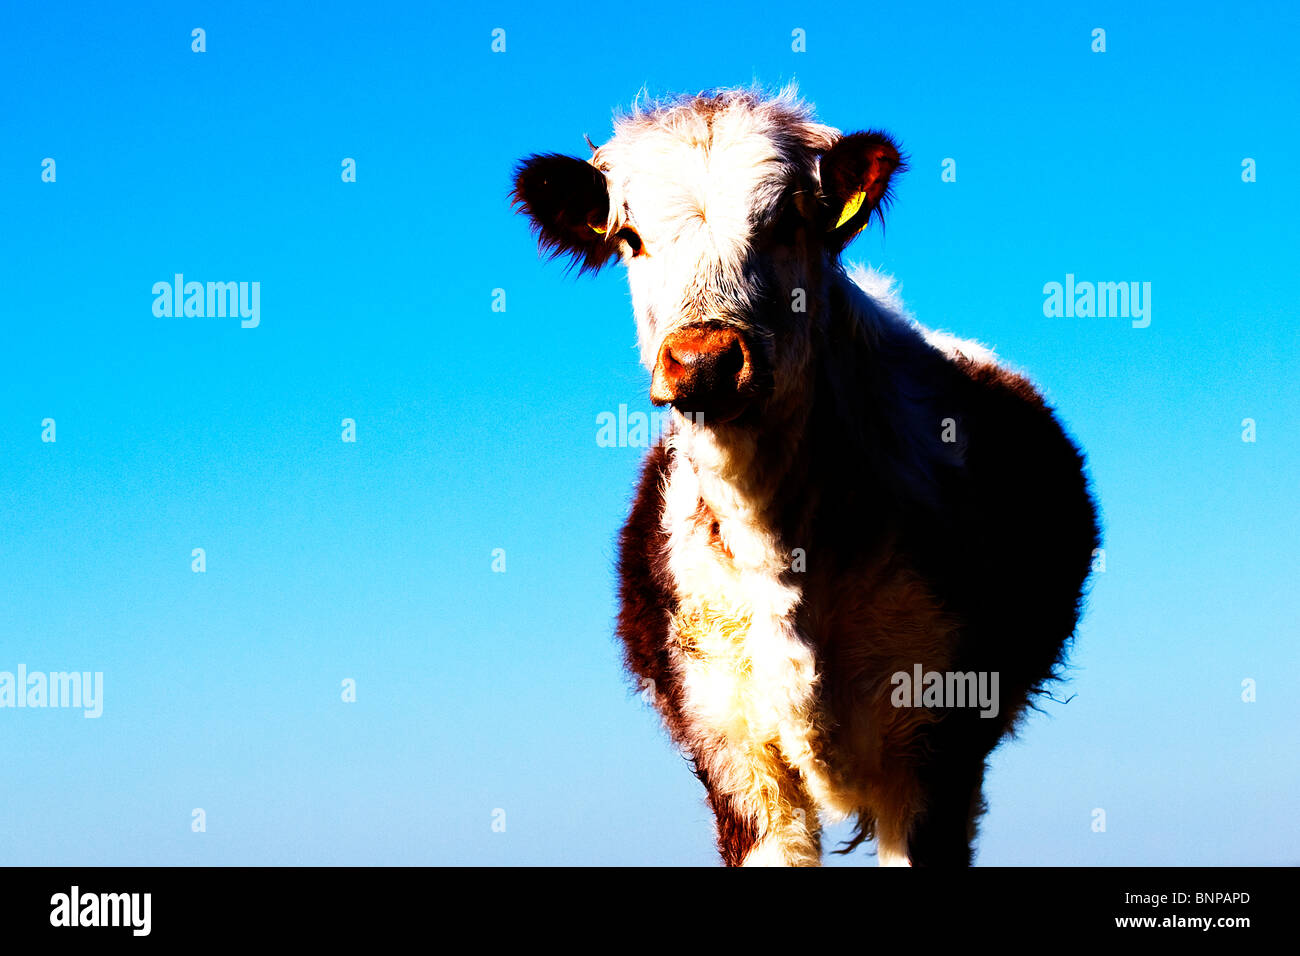 Short Long Horn Calf. Cute and Fluffy Baby Cow. Stock Photo